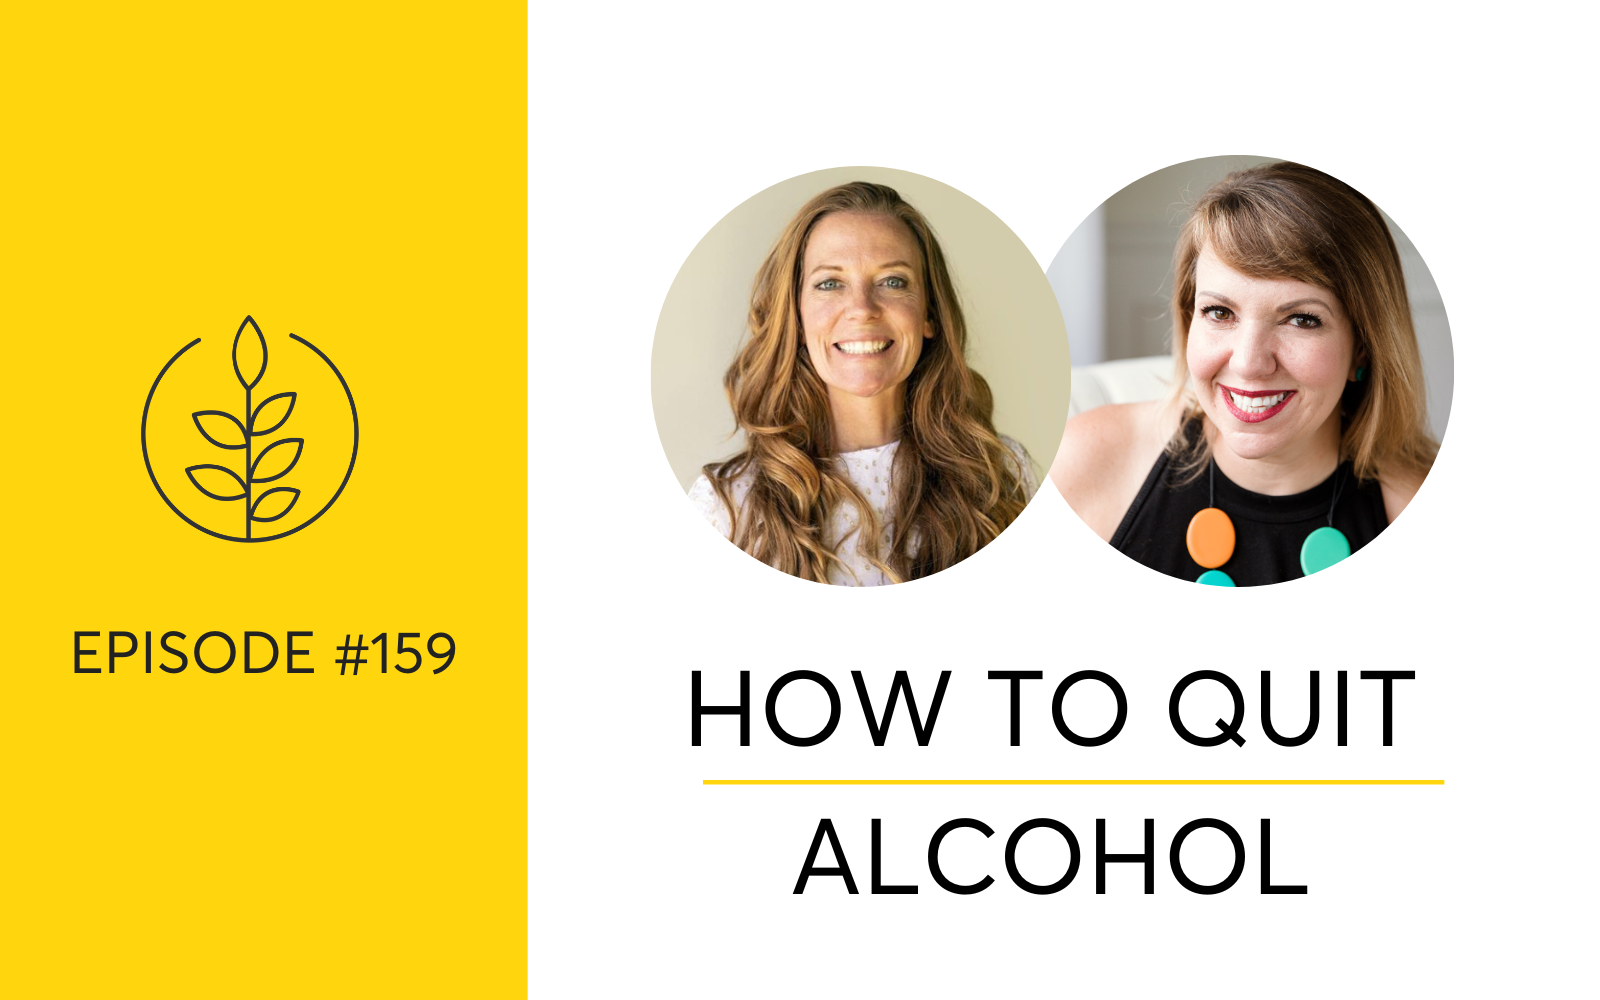 Want To Know How To Quit Alcohol?